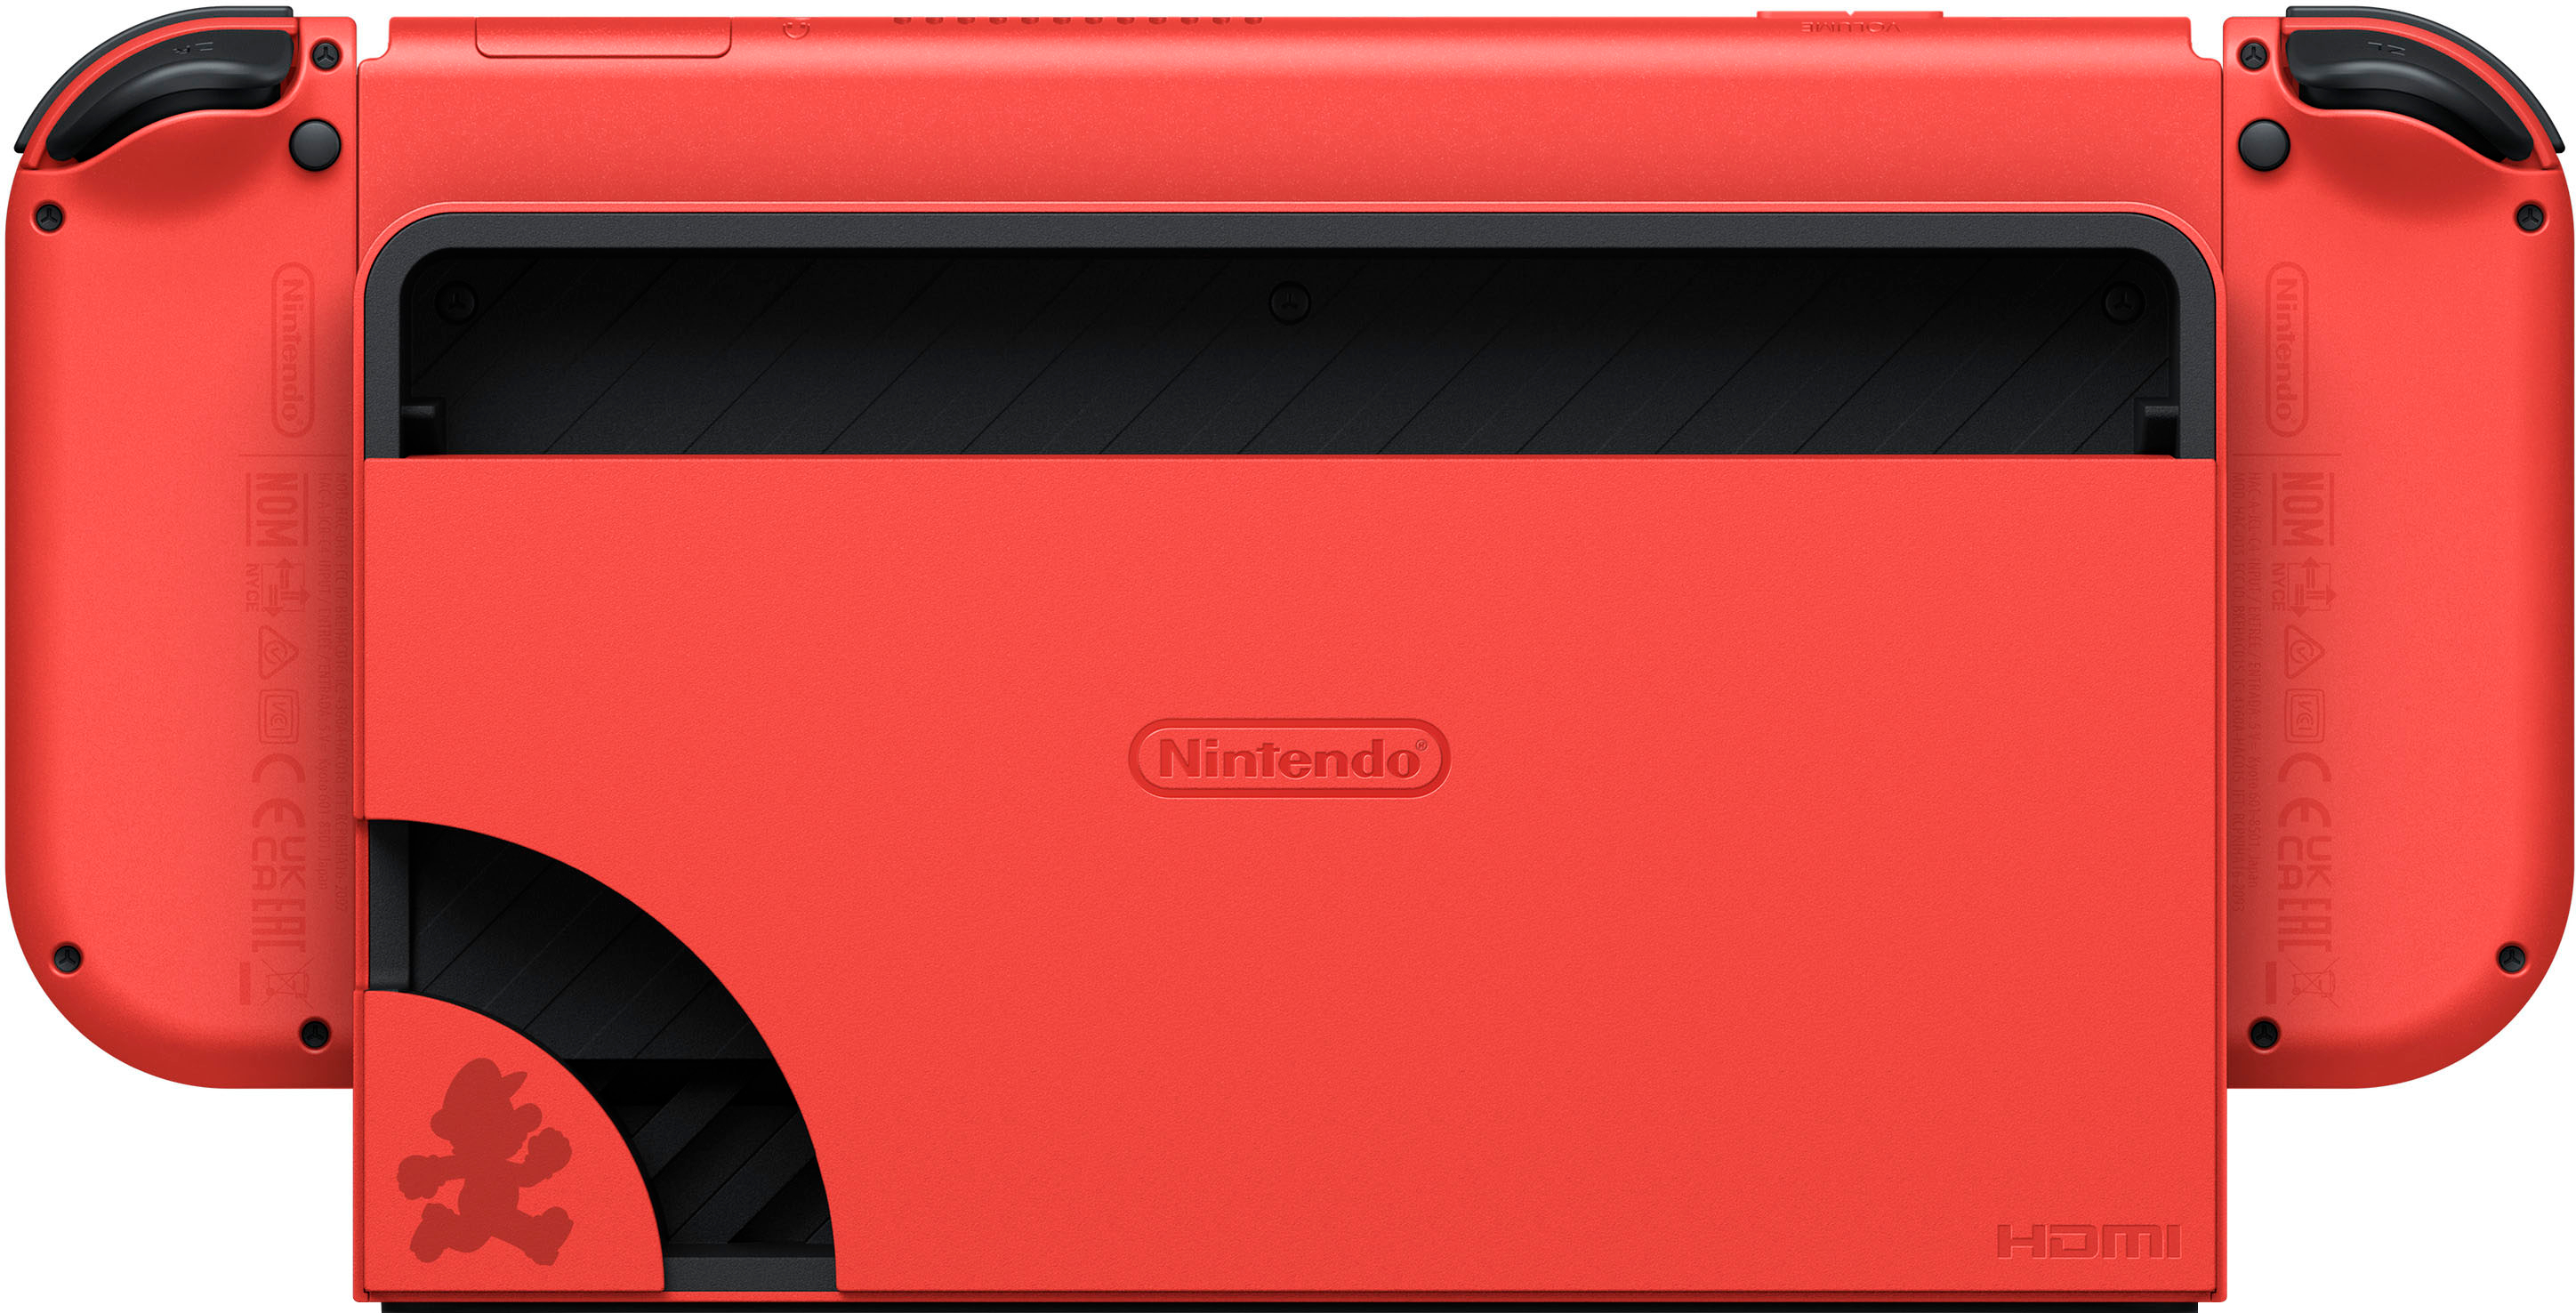 Edition Model: OLED Red Nintendo Best Mario - Switch Buy Red